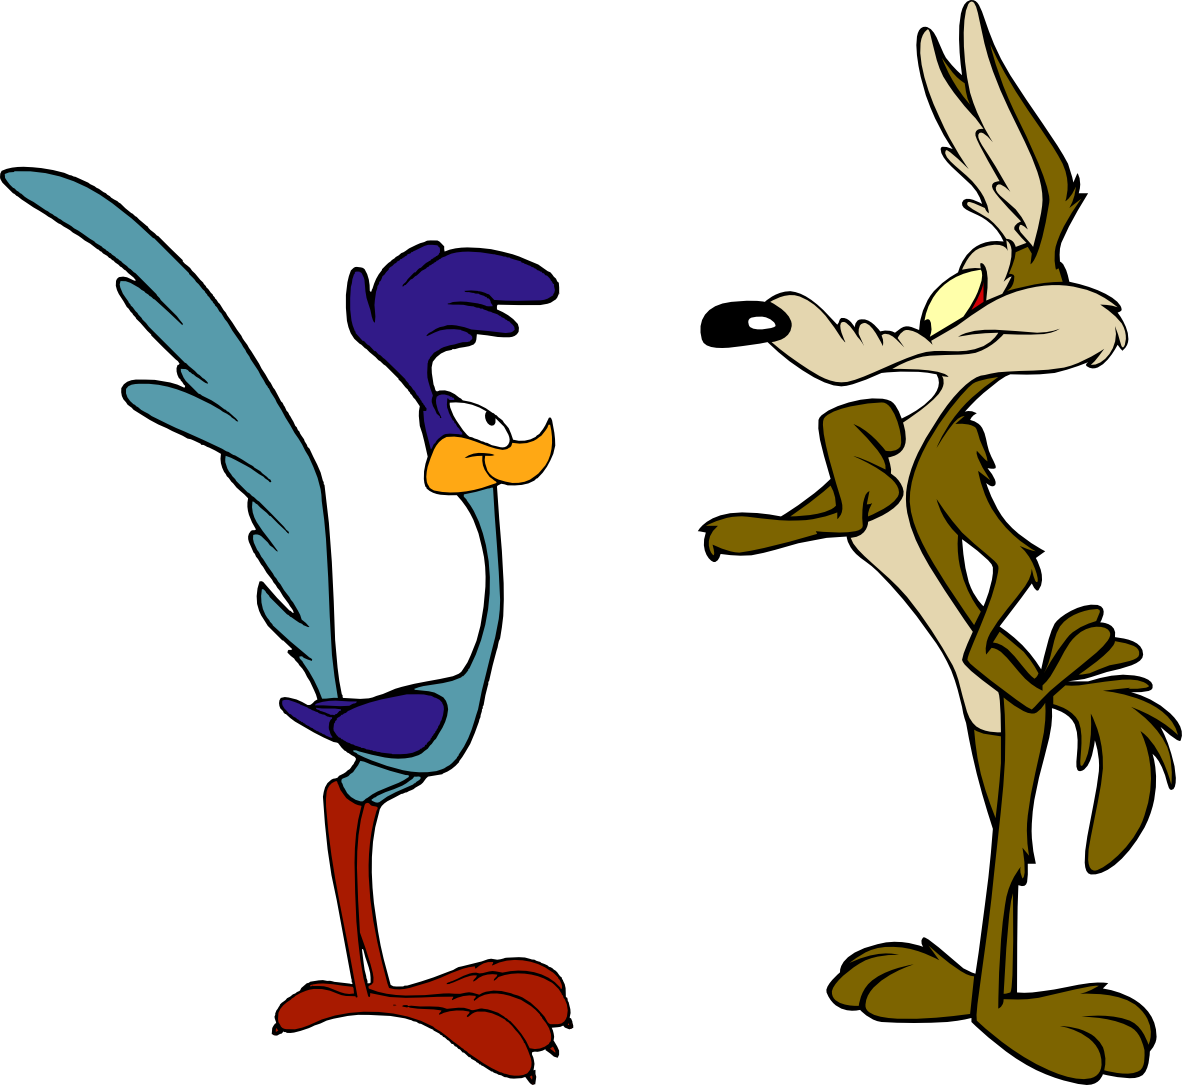 Wile_E._Coyote_and_The_Road_Runner